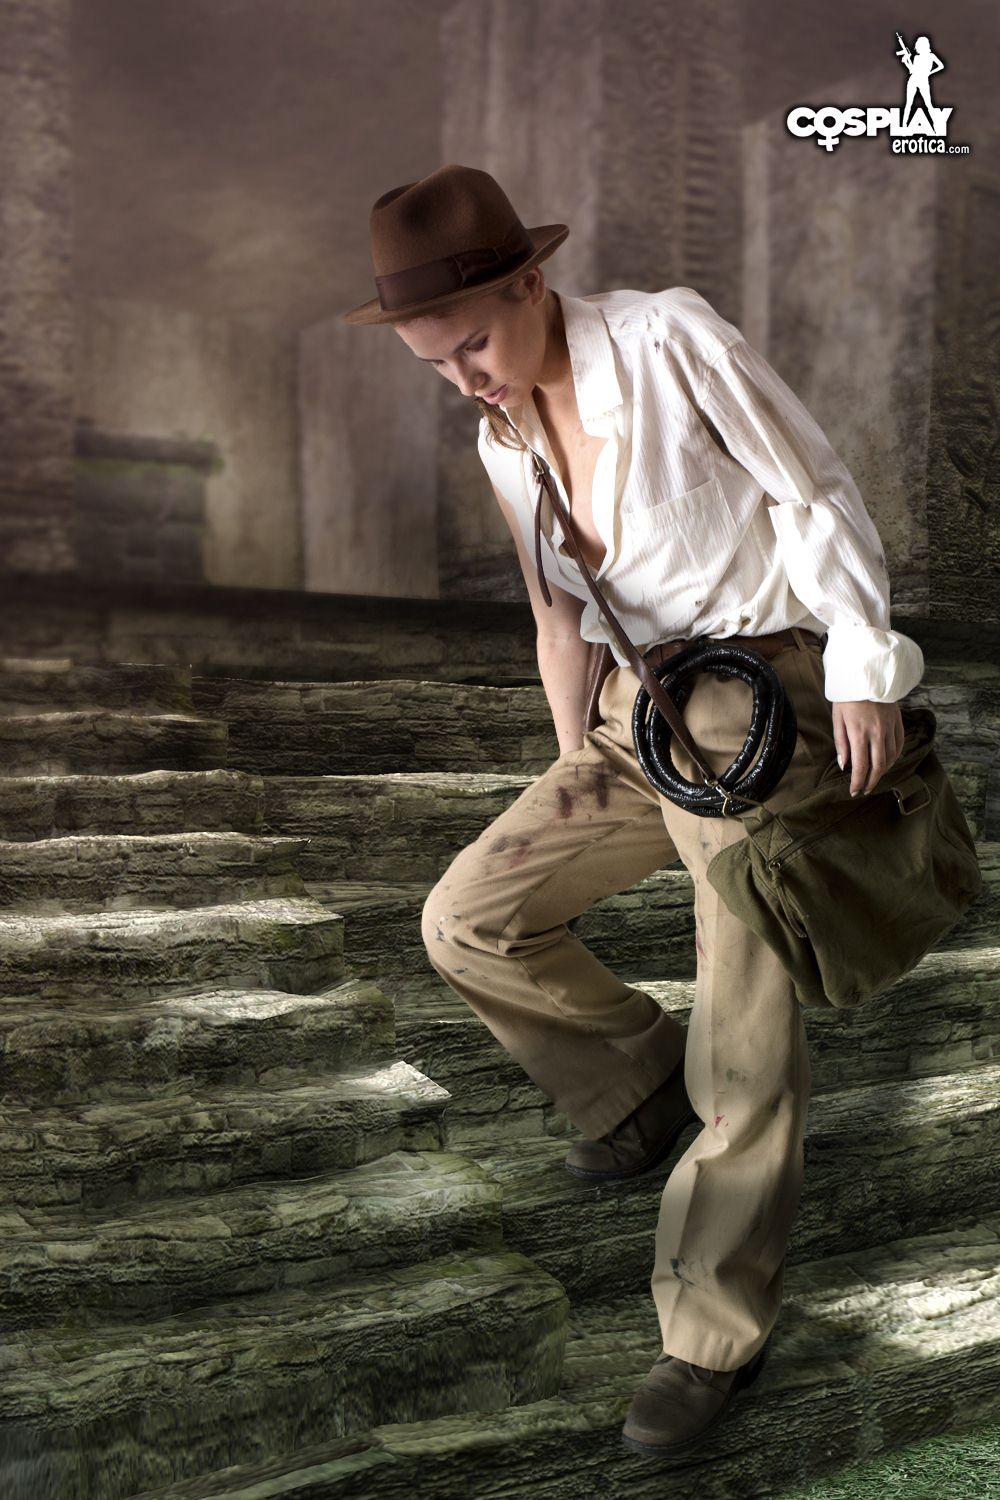 Cosplayer Cassie dresses up as a sexy female Indiana Jones #53702758